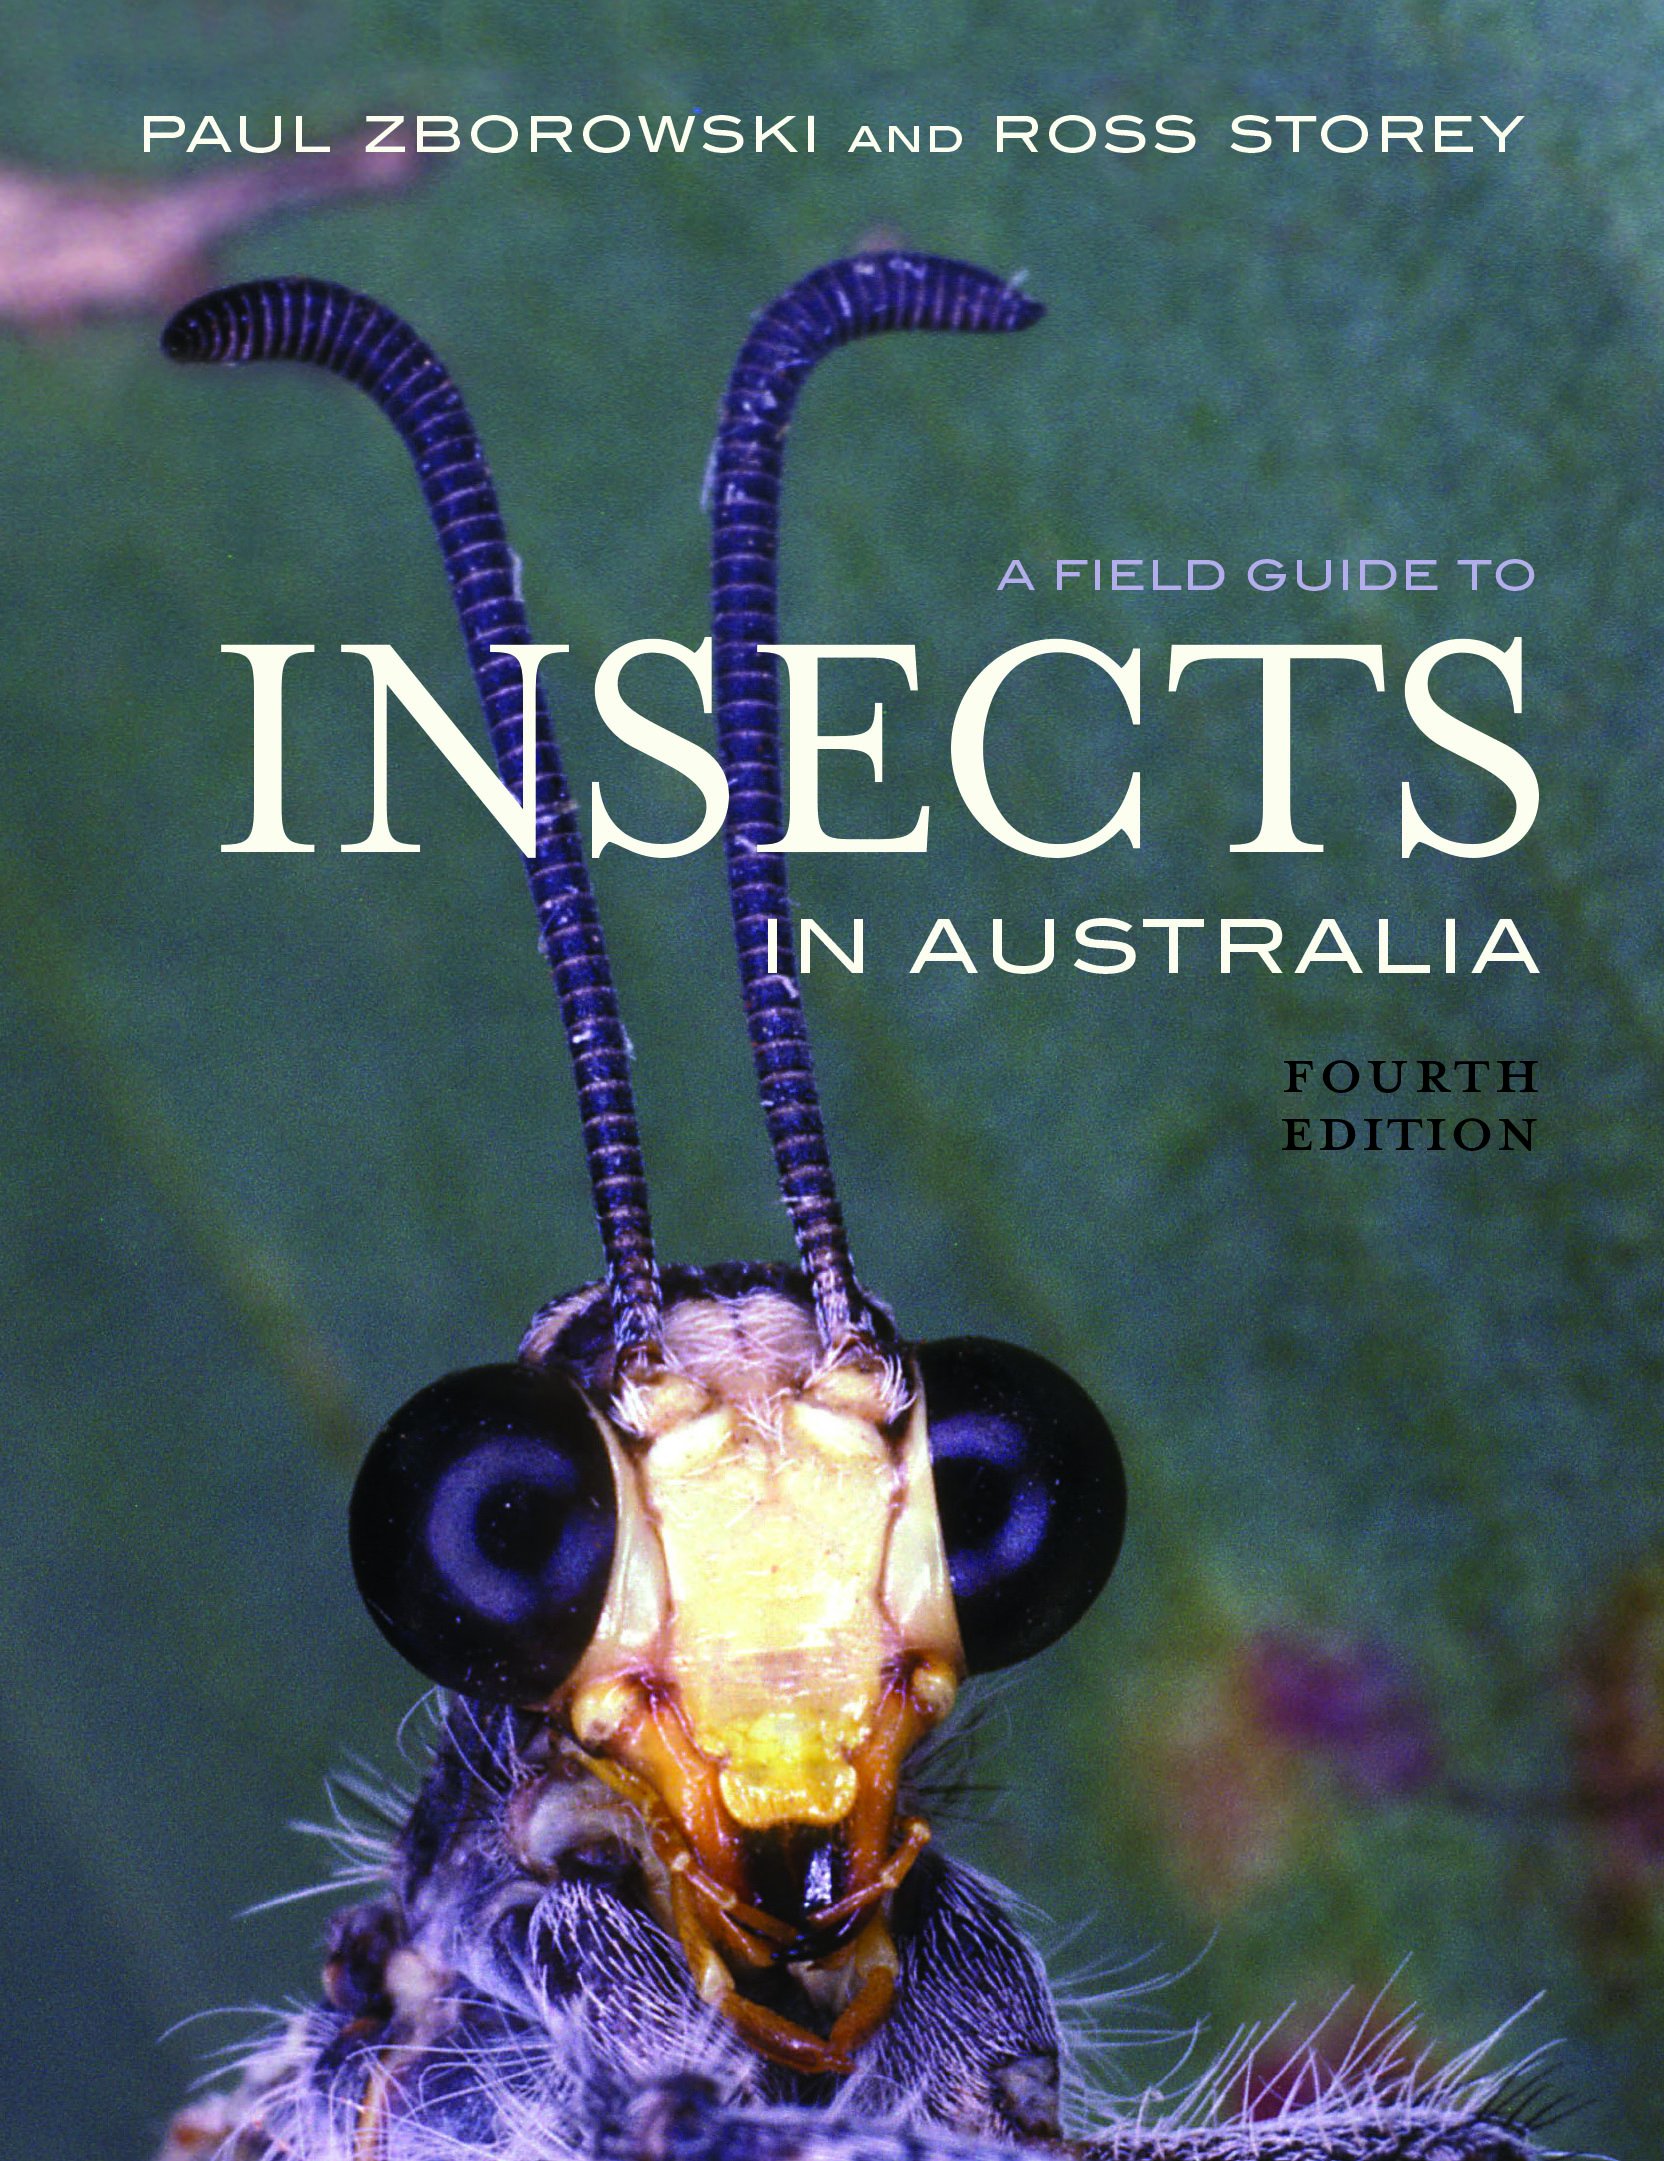 A Field Guide To Insects In Australia, by Paul Zborowski and Ross Storey - Australian Field Guides and Nature Books